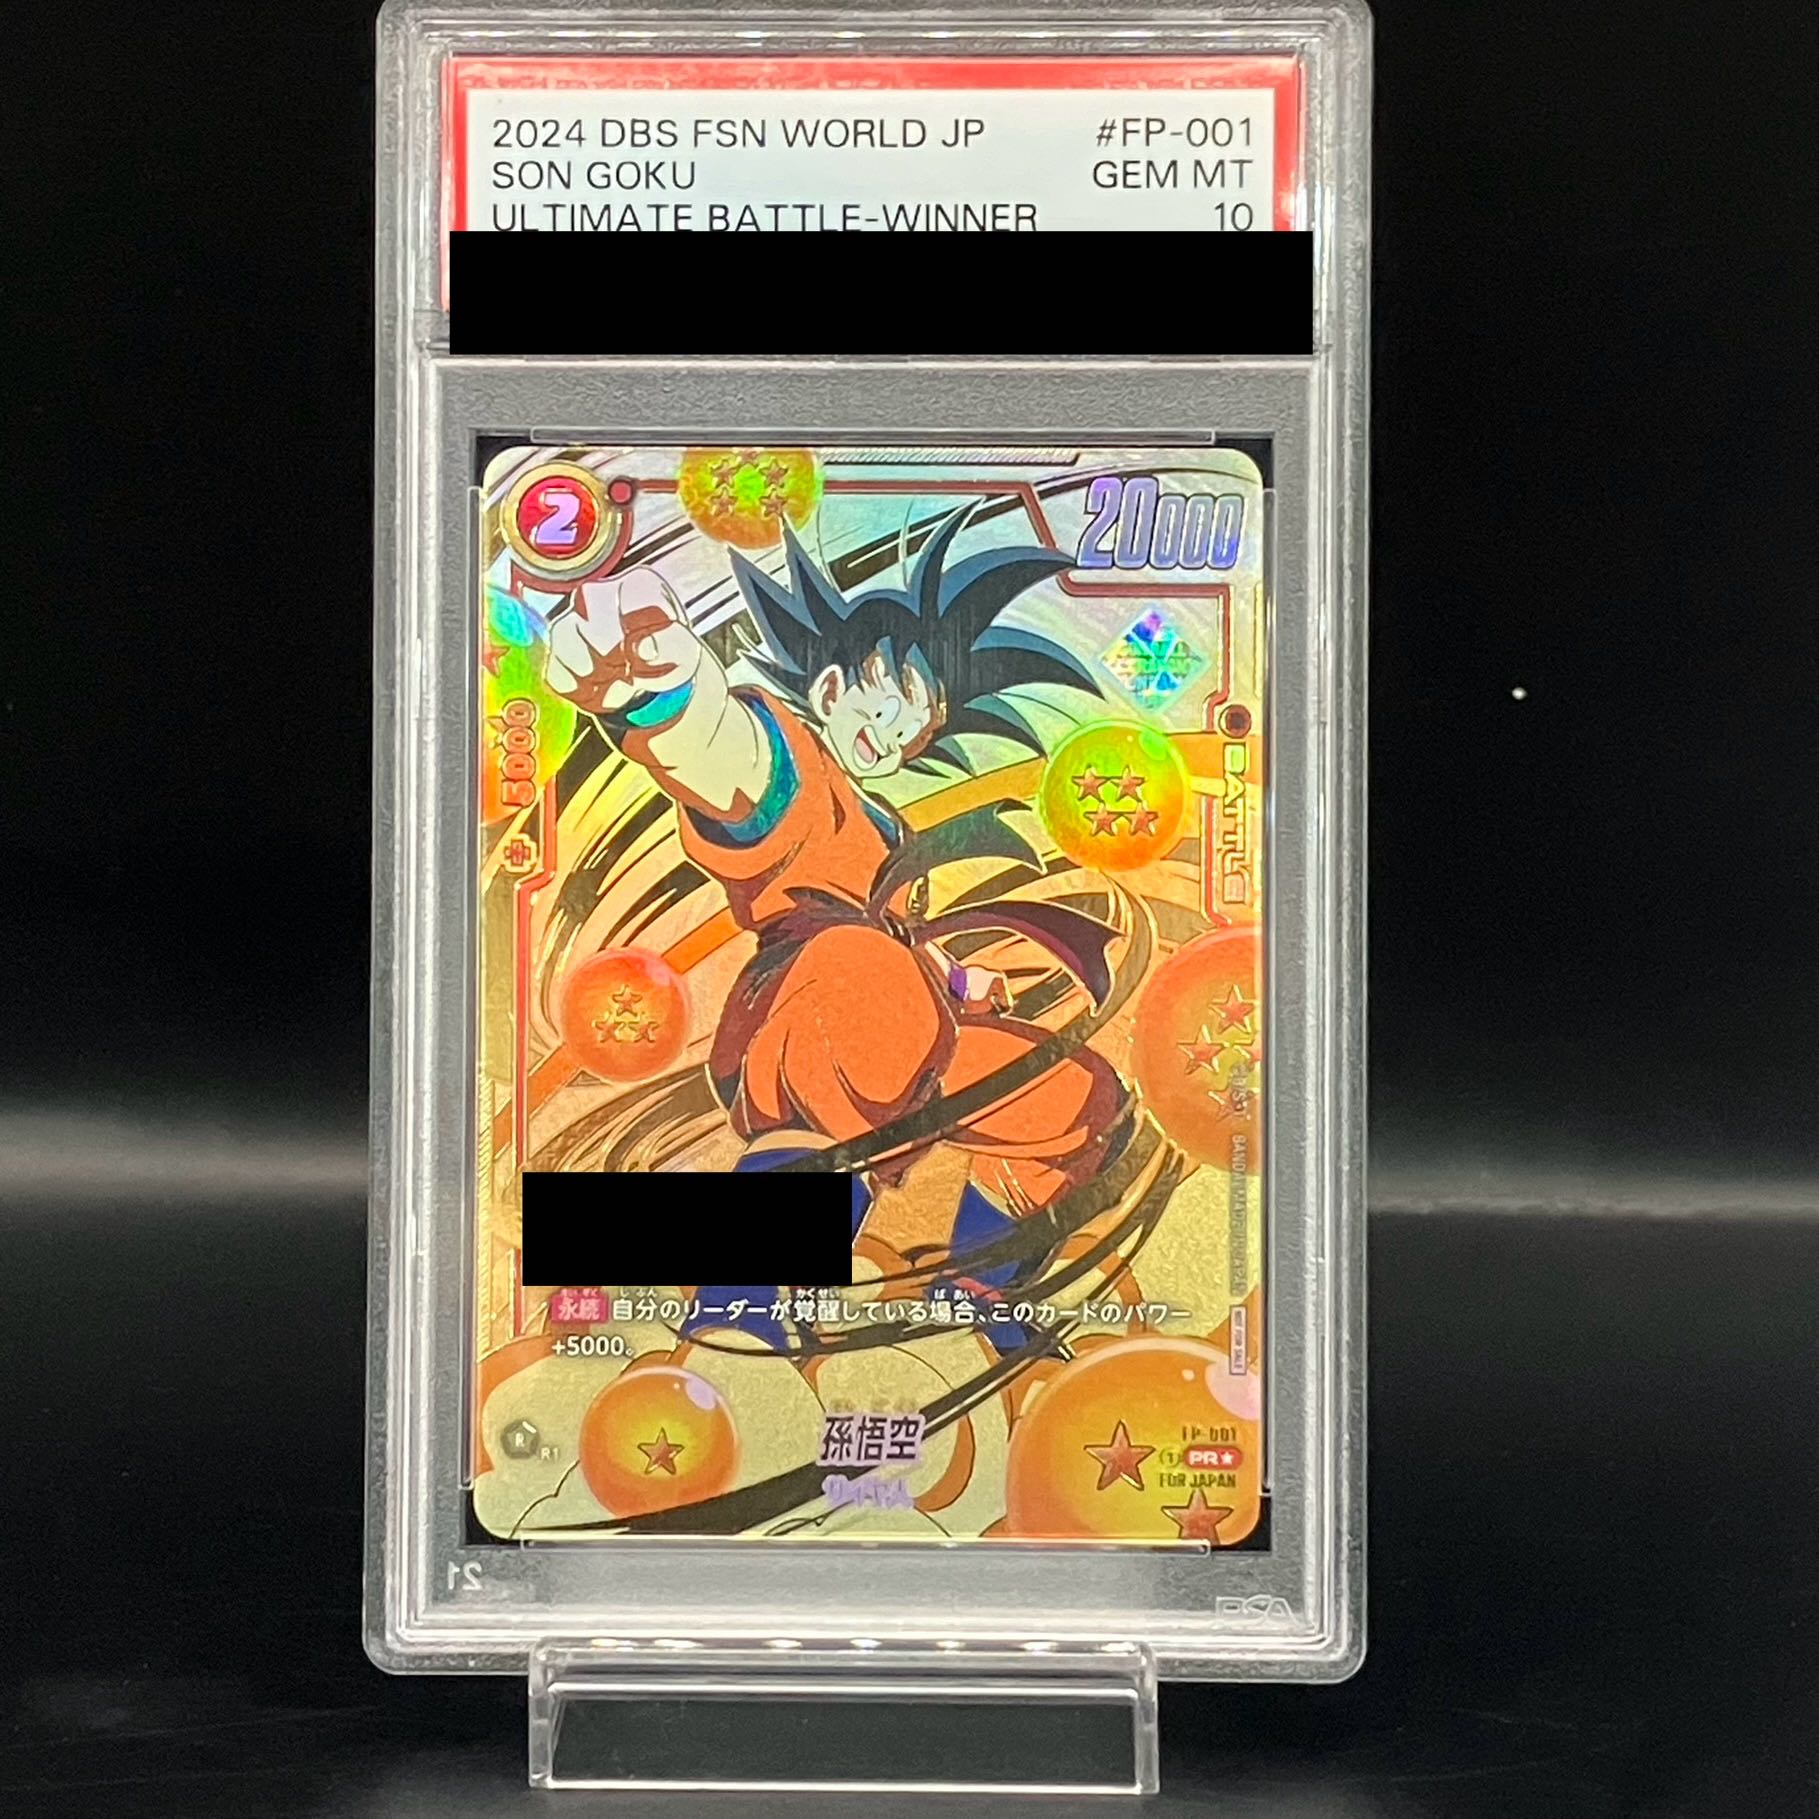 PSA10] Sun Wukong, serial numbered FP-001 PROMO FP-001